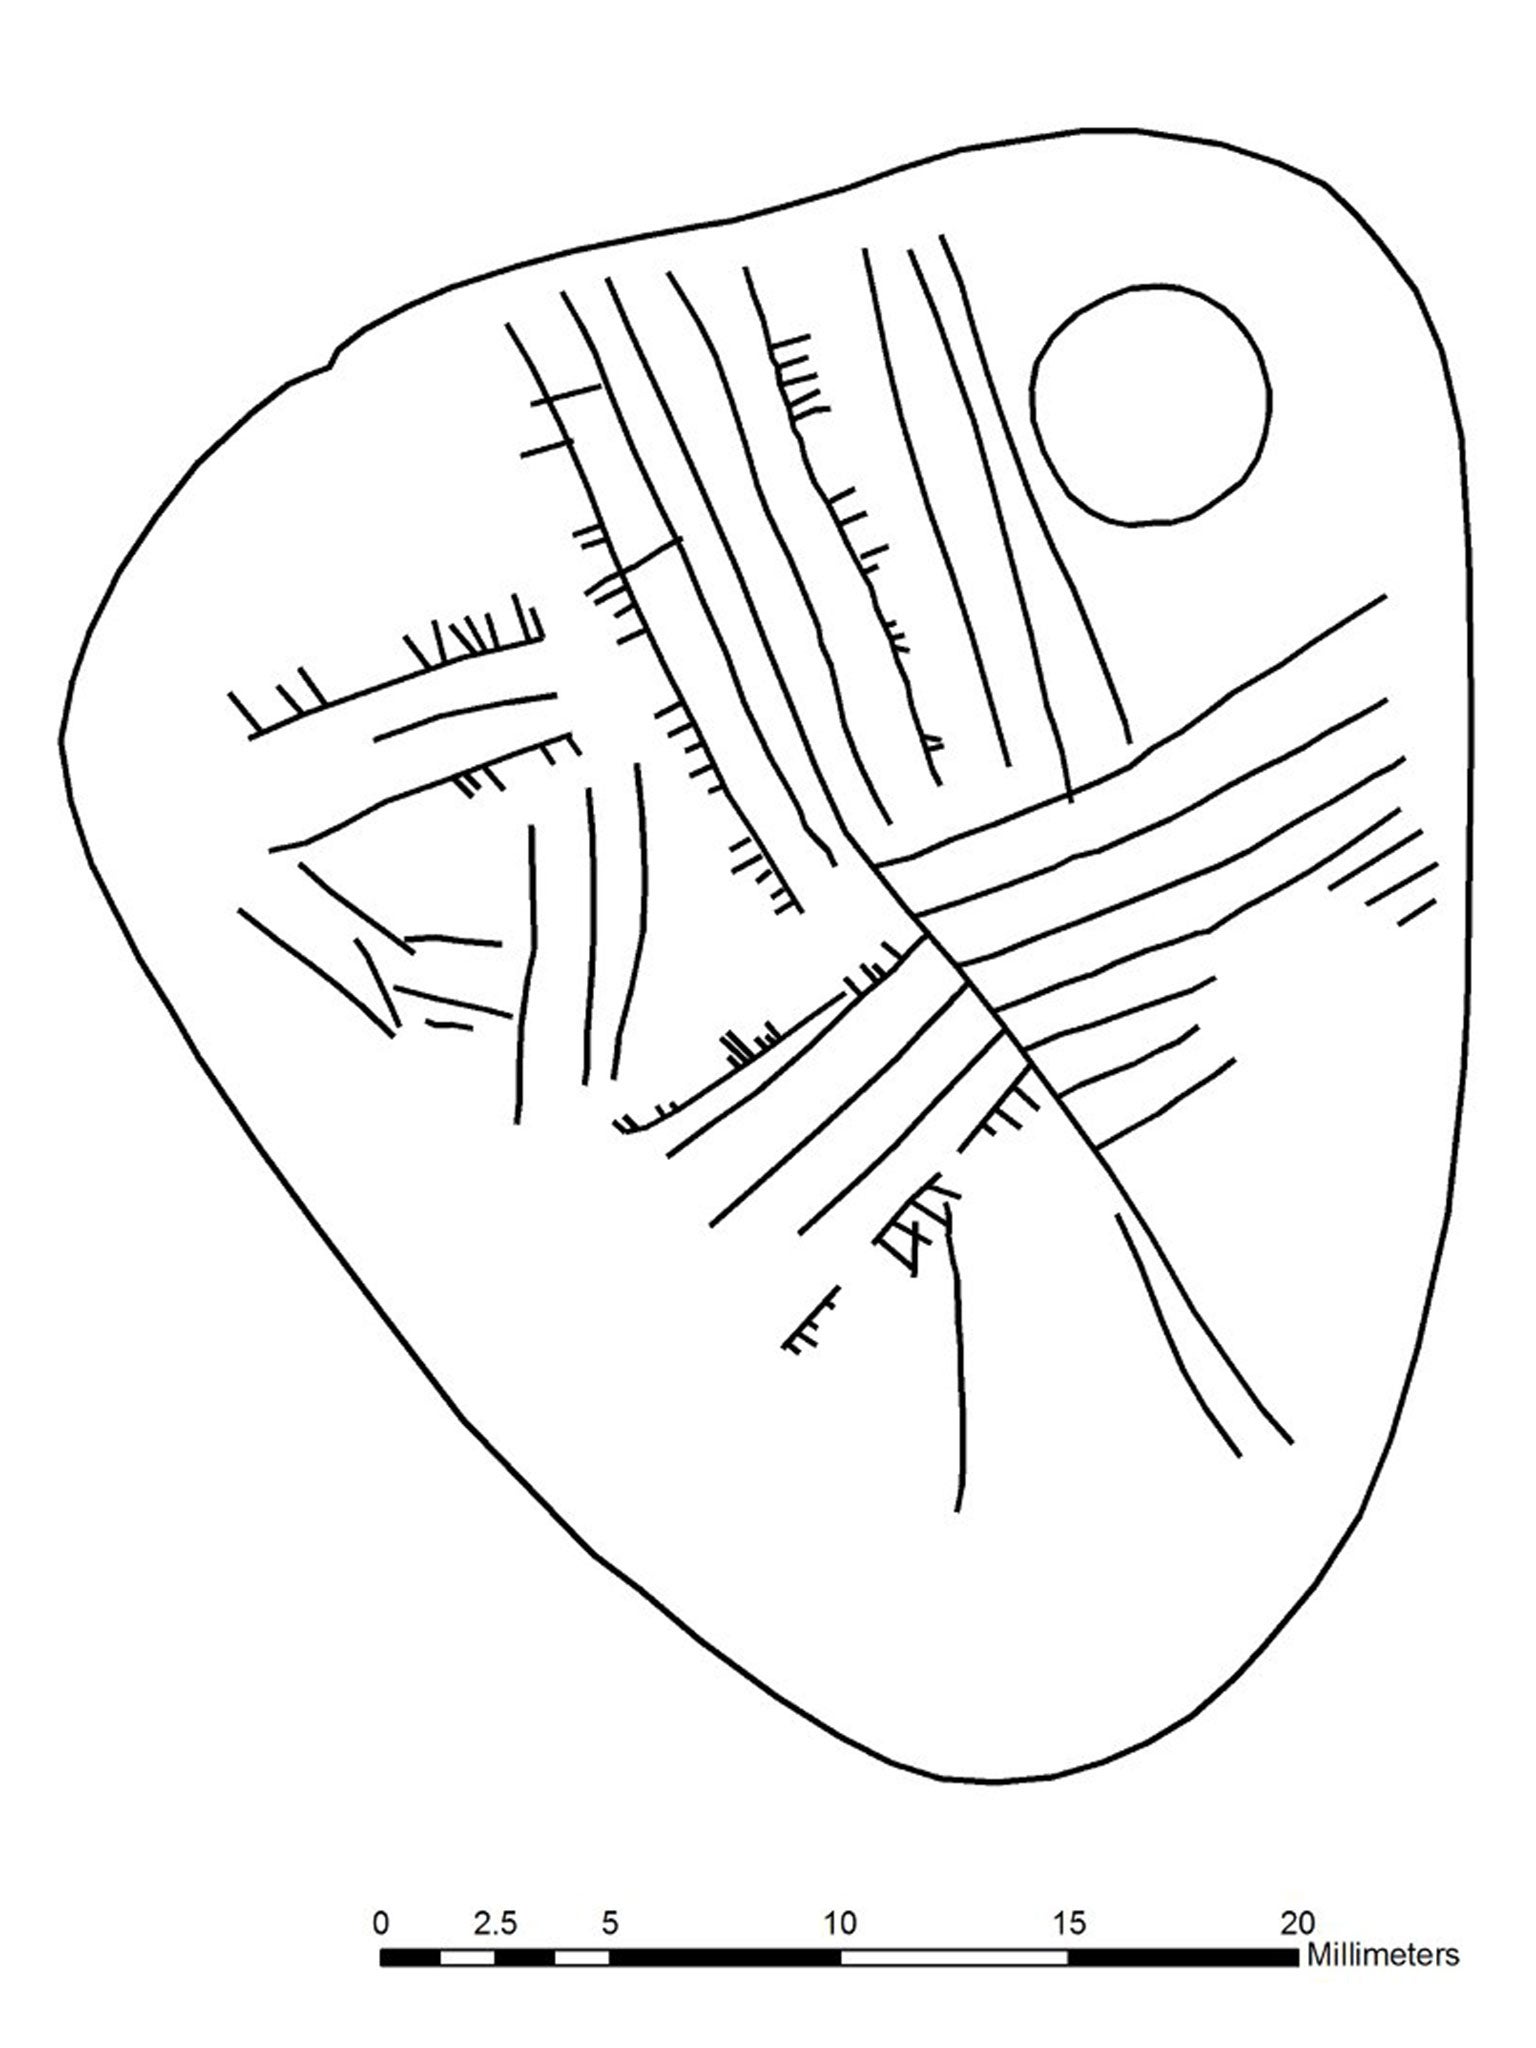 Drawing of the complex of long and short 'secret code' lines on the 11,000 year old stone pendant